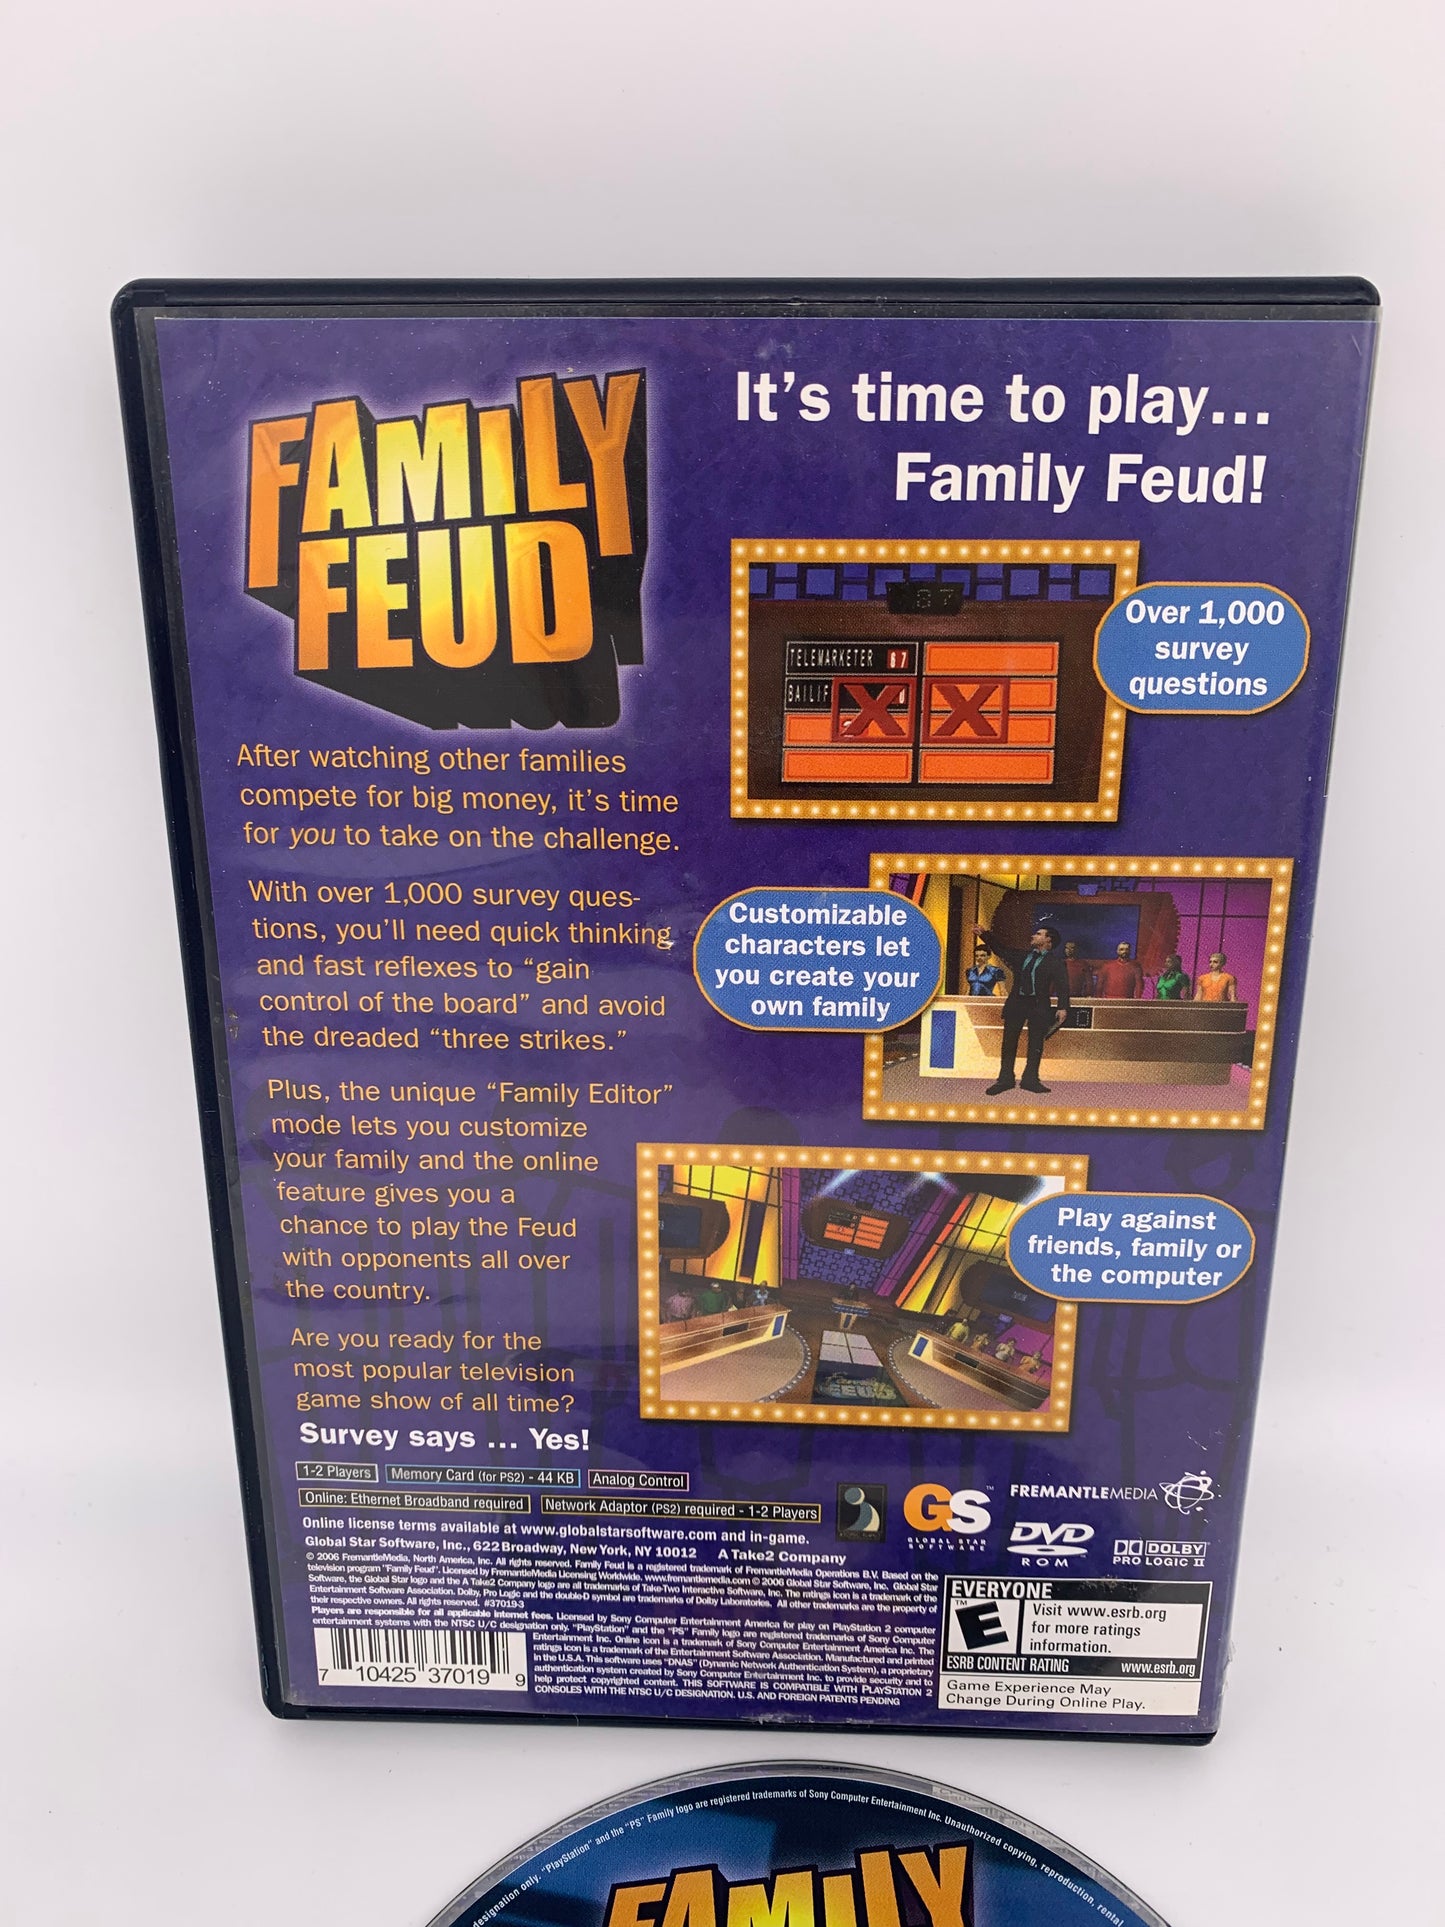 SONY PLAYSTATiON 2 [PS2] | FAMiLY FEUD